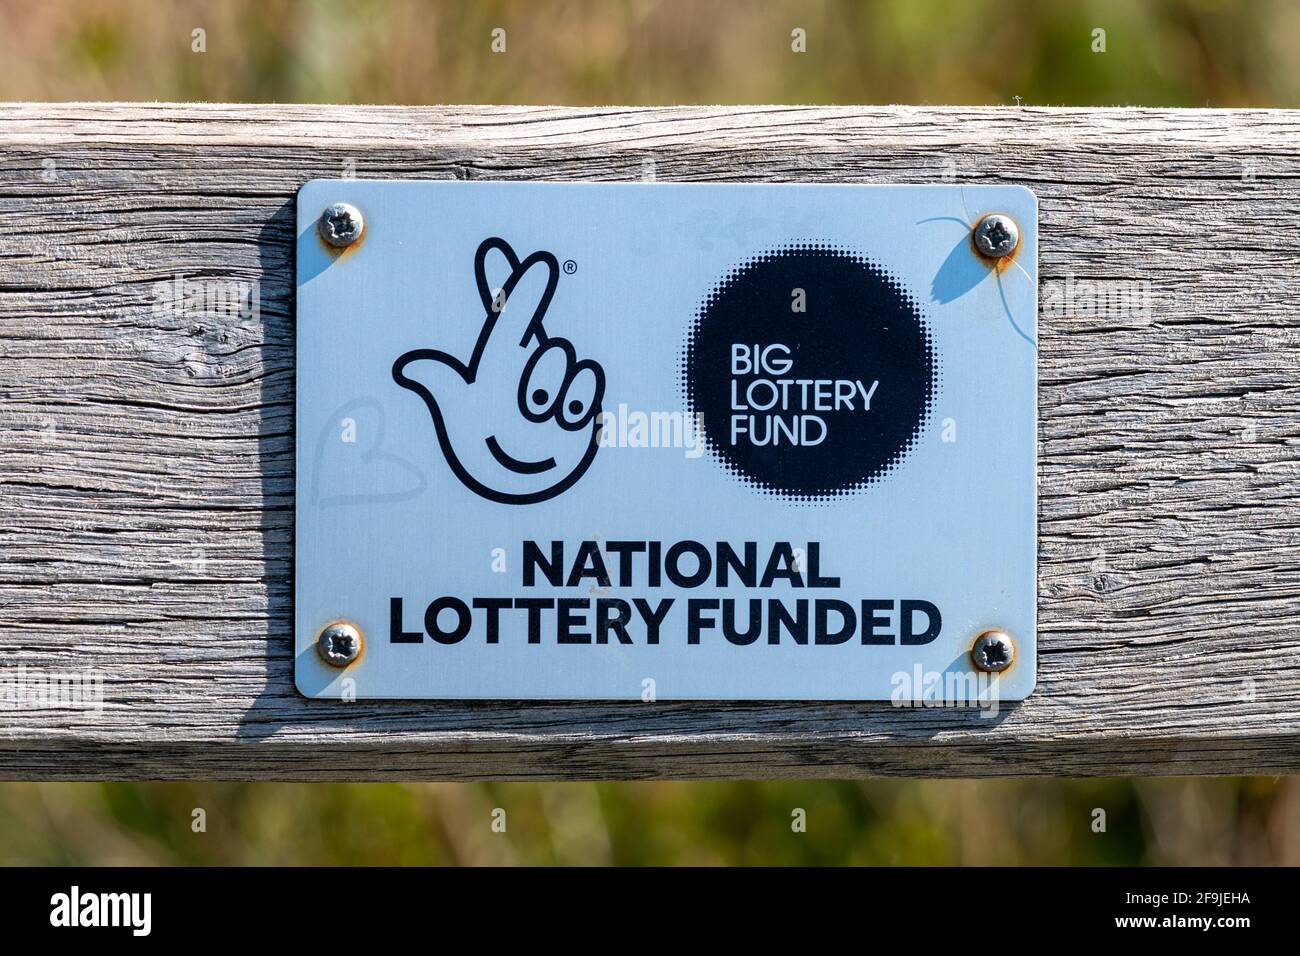 National lottery funded, big lottery fund, plaque on a wooden bench in Tices Meadow nature reserve, Surrey, UK Stock Photo